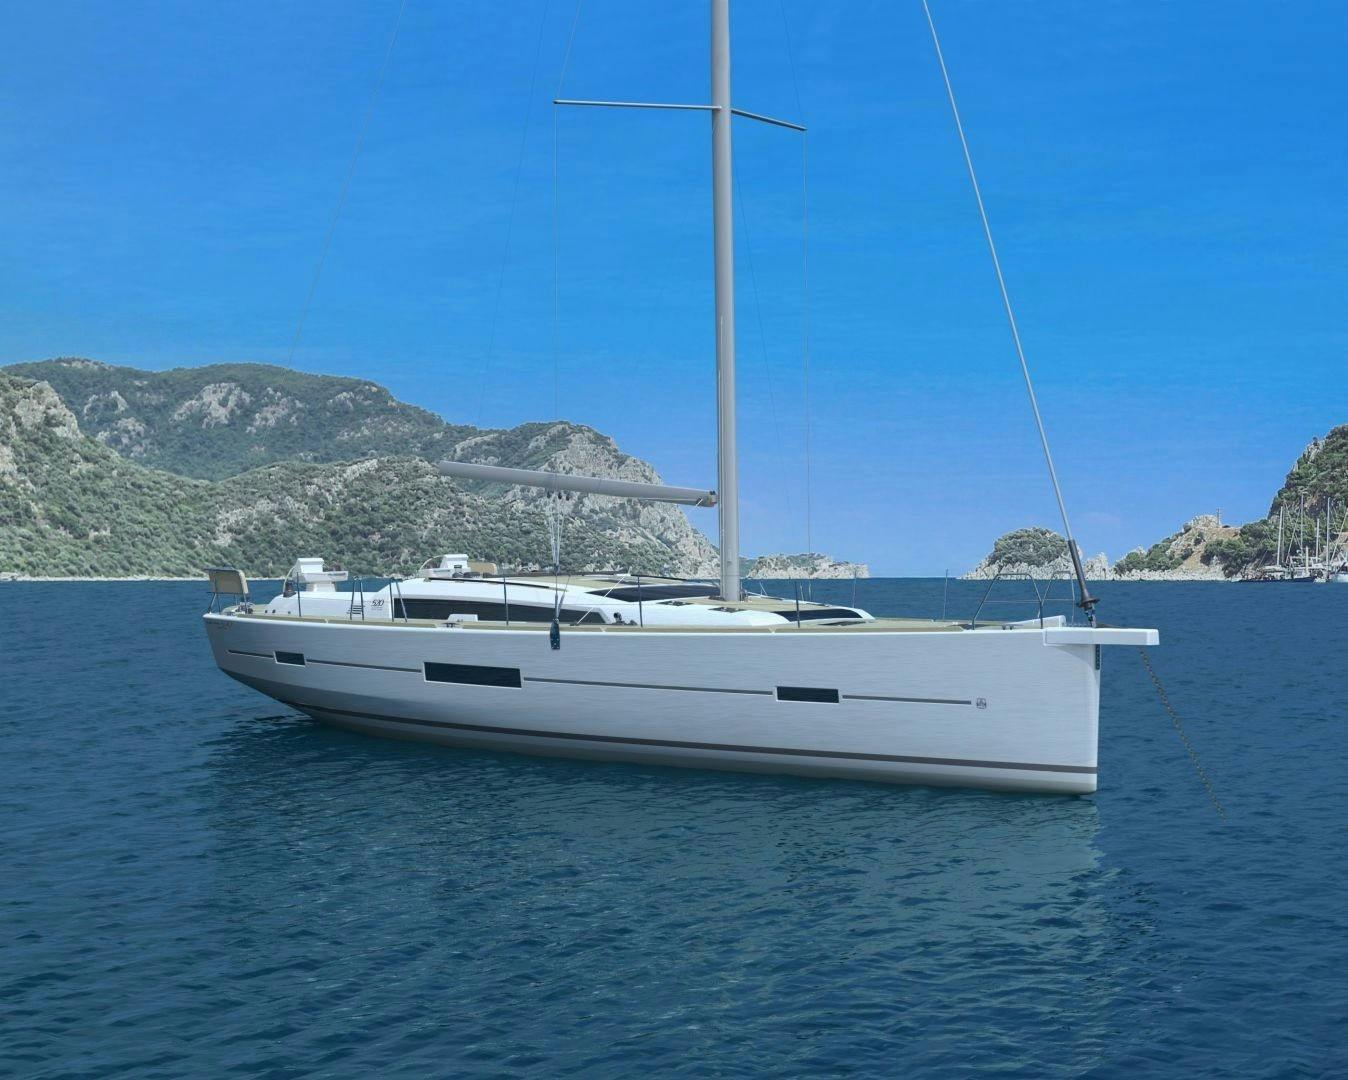 Book Dufour 520 GL Sailing yacht for bareboat charter in Corsica, Ajaccio, Port Tino Rossi, Corsica, France with TripYacht!, picture 1